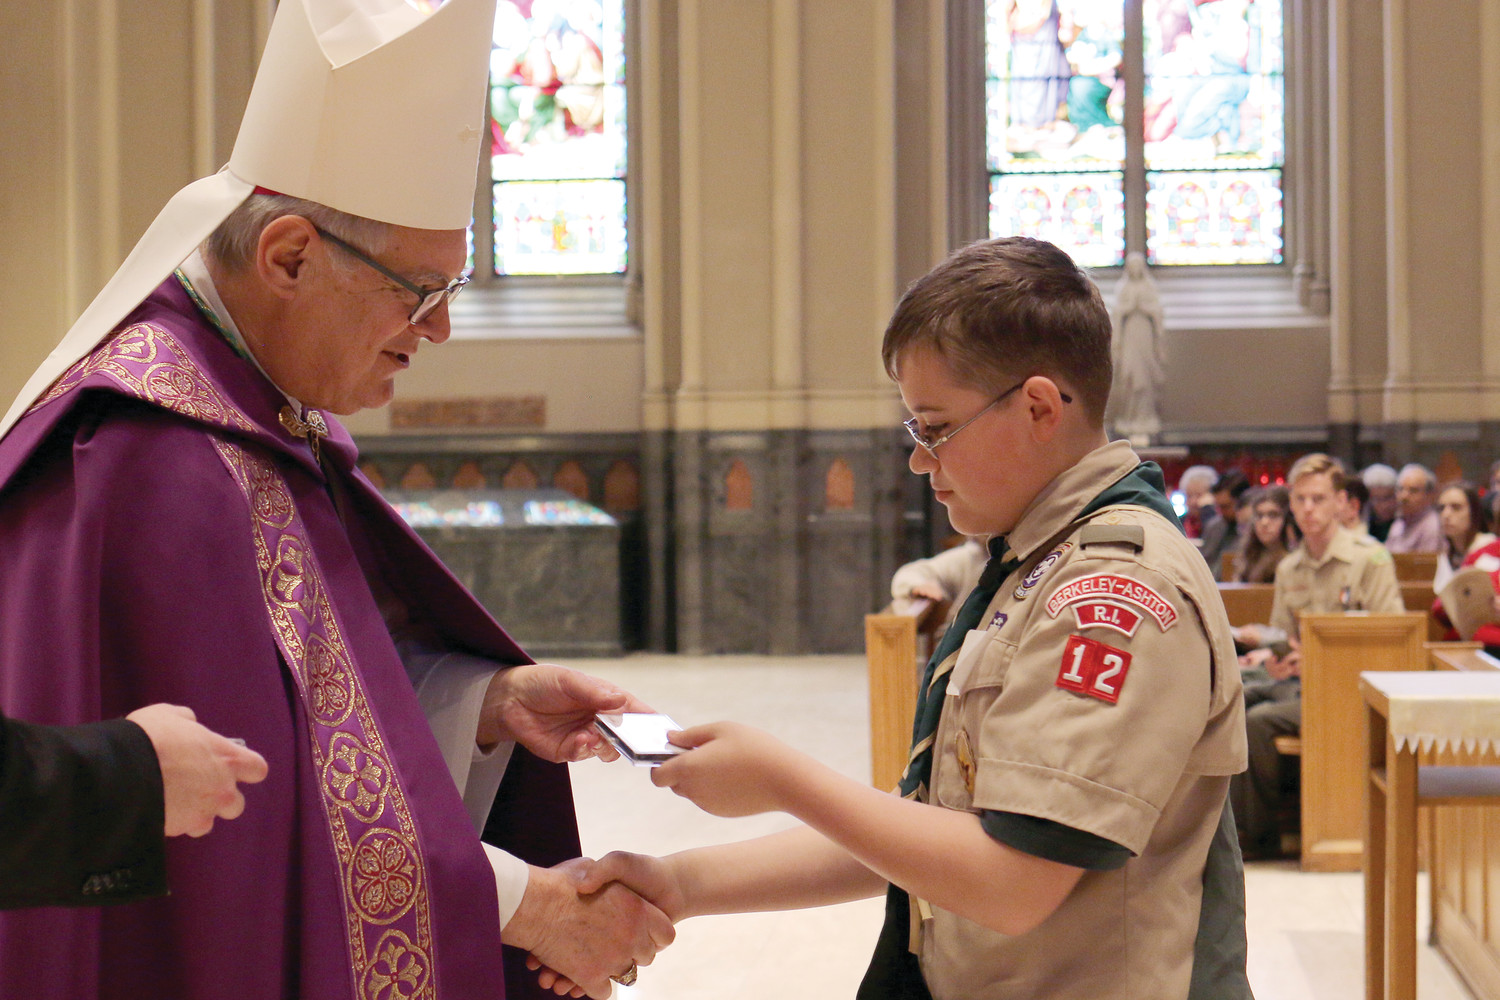 Bishop Thomas J. Tobin presents awards at the Diocesan Catholic Youth Ministry and Scout Awards celebration on Sunday, March 11, at the Cathedral of Saints Peter and Paul in Providence. Pictured: Robert Kenyon, parishioner of St. Aidan Church, honored with an Ad Altare Dei Emblem.